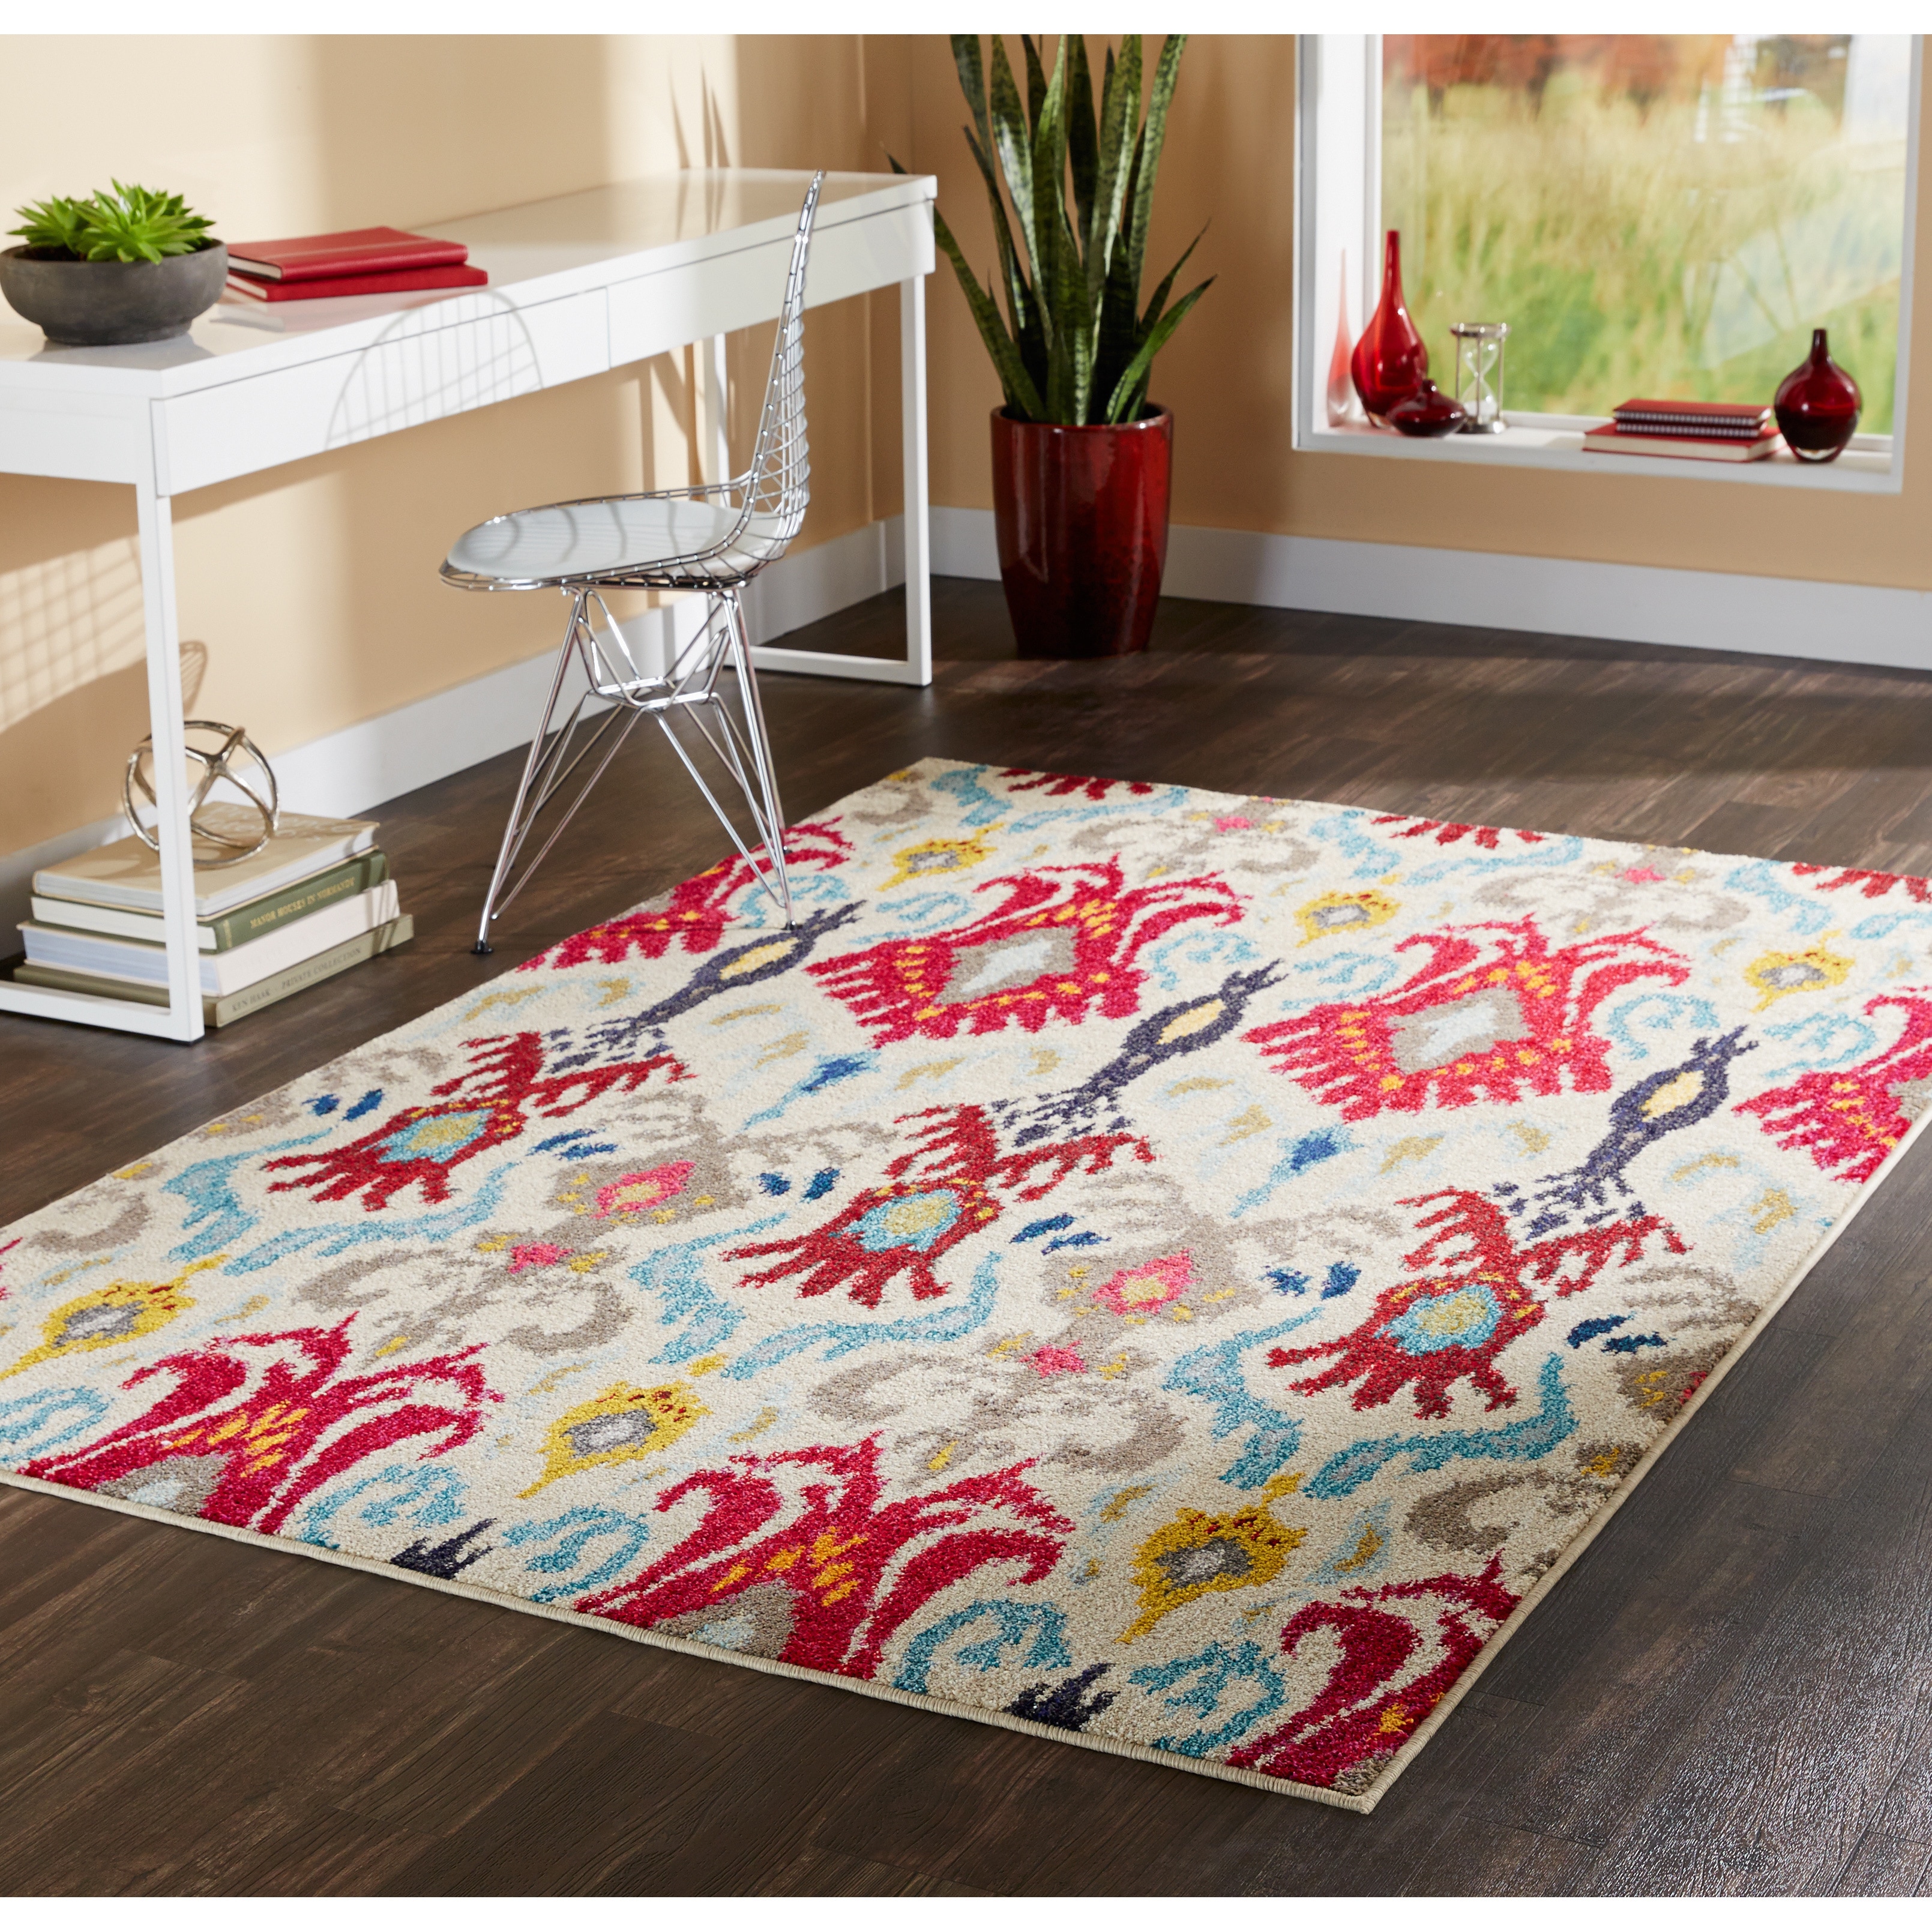 Vibrant Bohemian Ivory/ Red Area Rug (4 X 59)